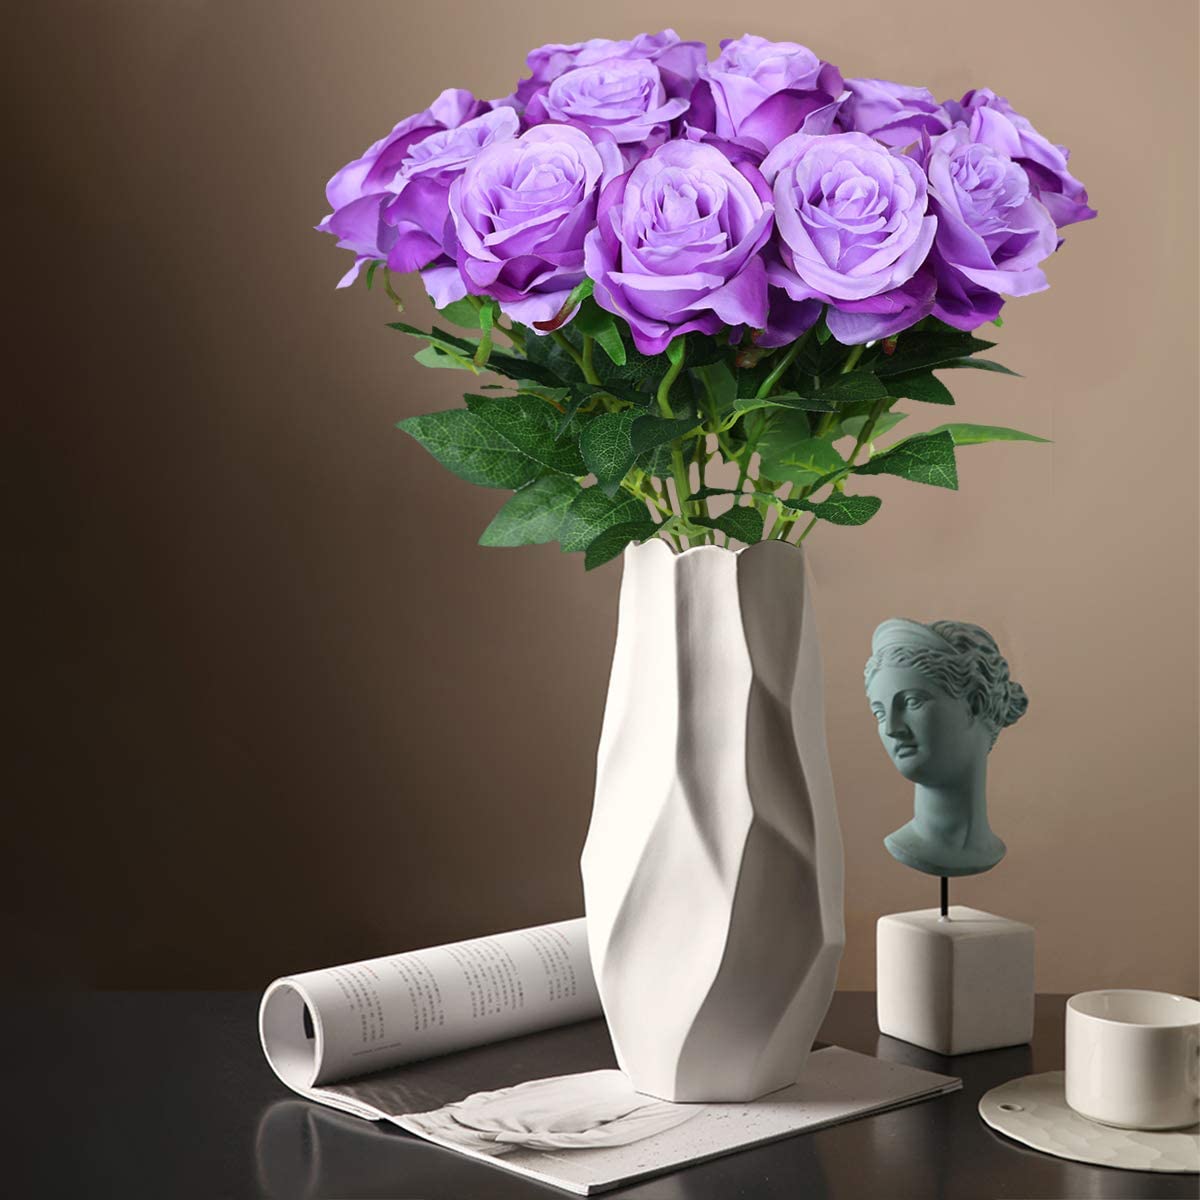 26pcs, Lavender Purple Roses Artificial Flowers Combo Box, Silk Fake Rose  Flowers With Stems For DIY Wedding Bouquets Bridal Shower Table Centerpieces